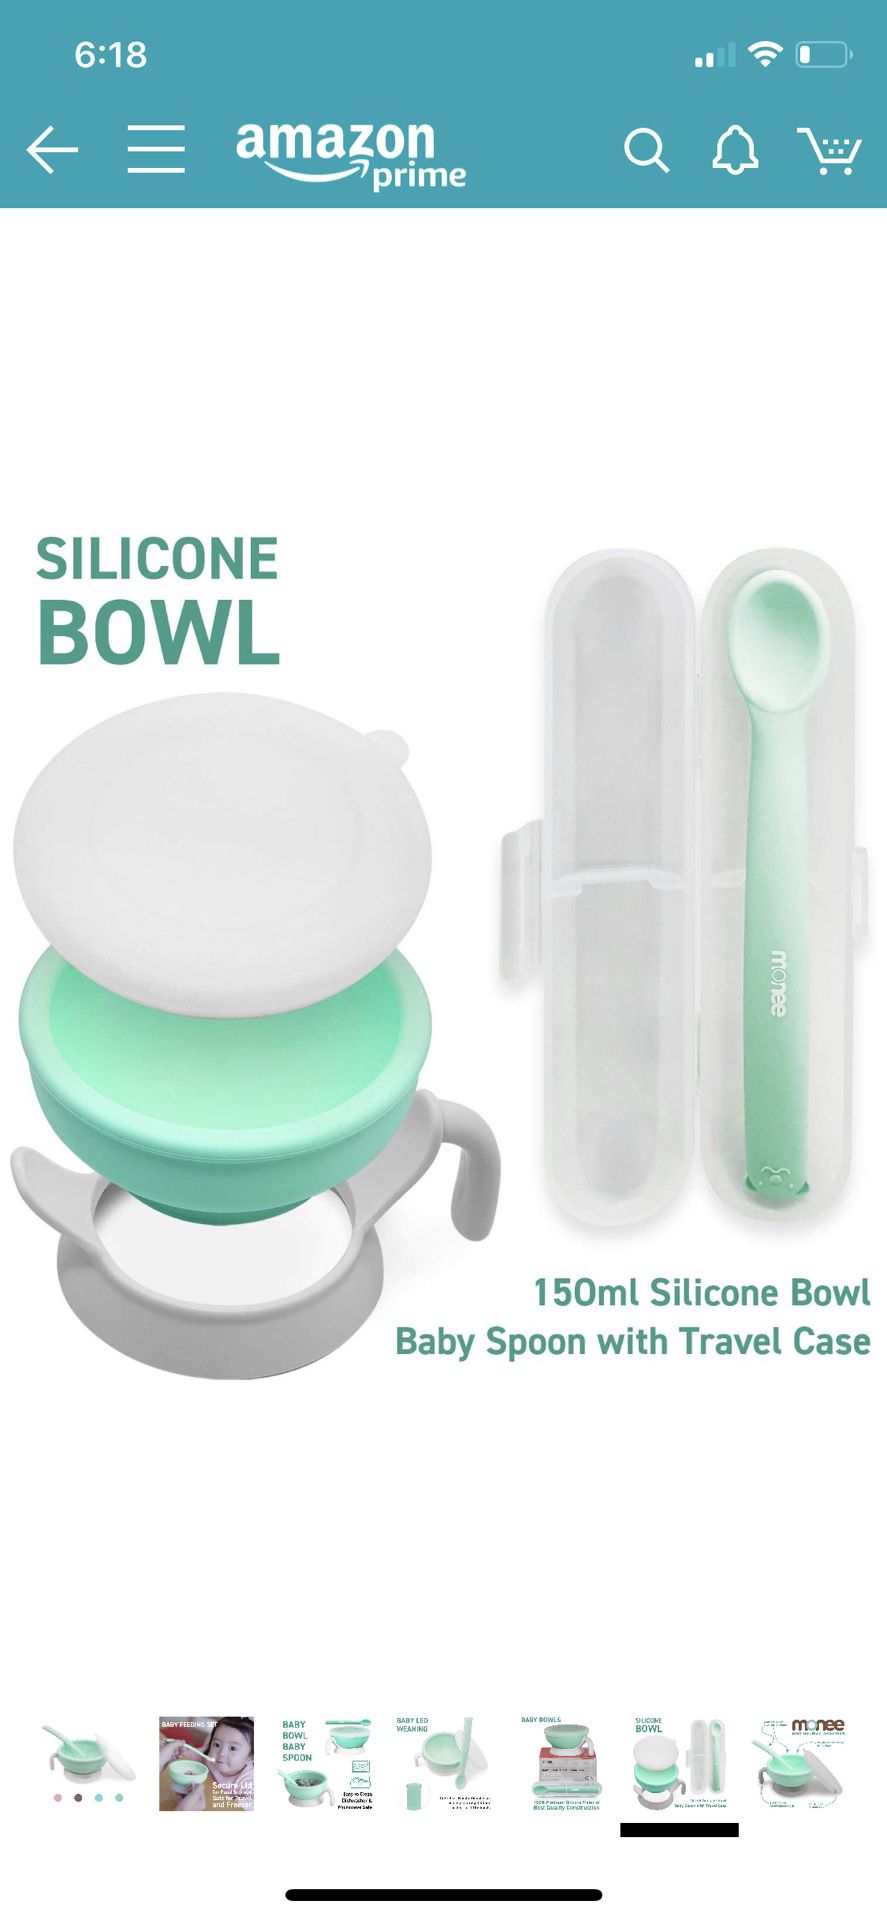 Platinum Silicone Baby Feeding Set, BPA Free, Dishwasher Safe, Leak Proof Lid, Storage & Travel, Spoon Doubles as a Soft Teether for Baby Led Weaning